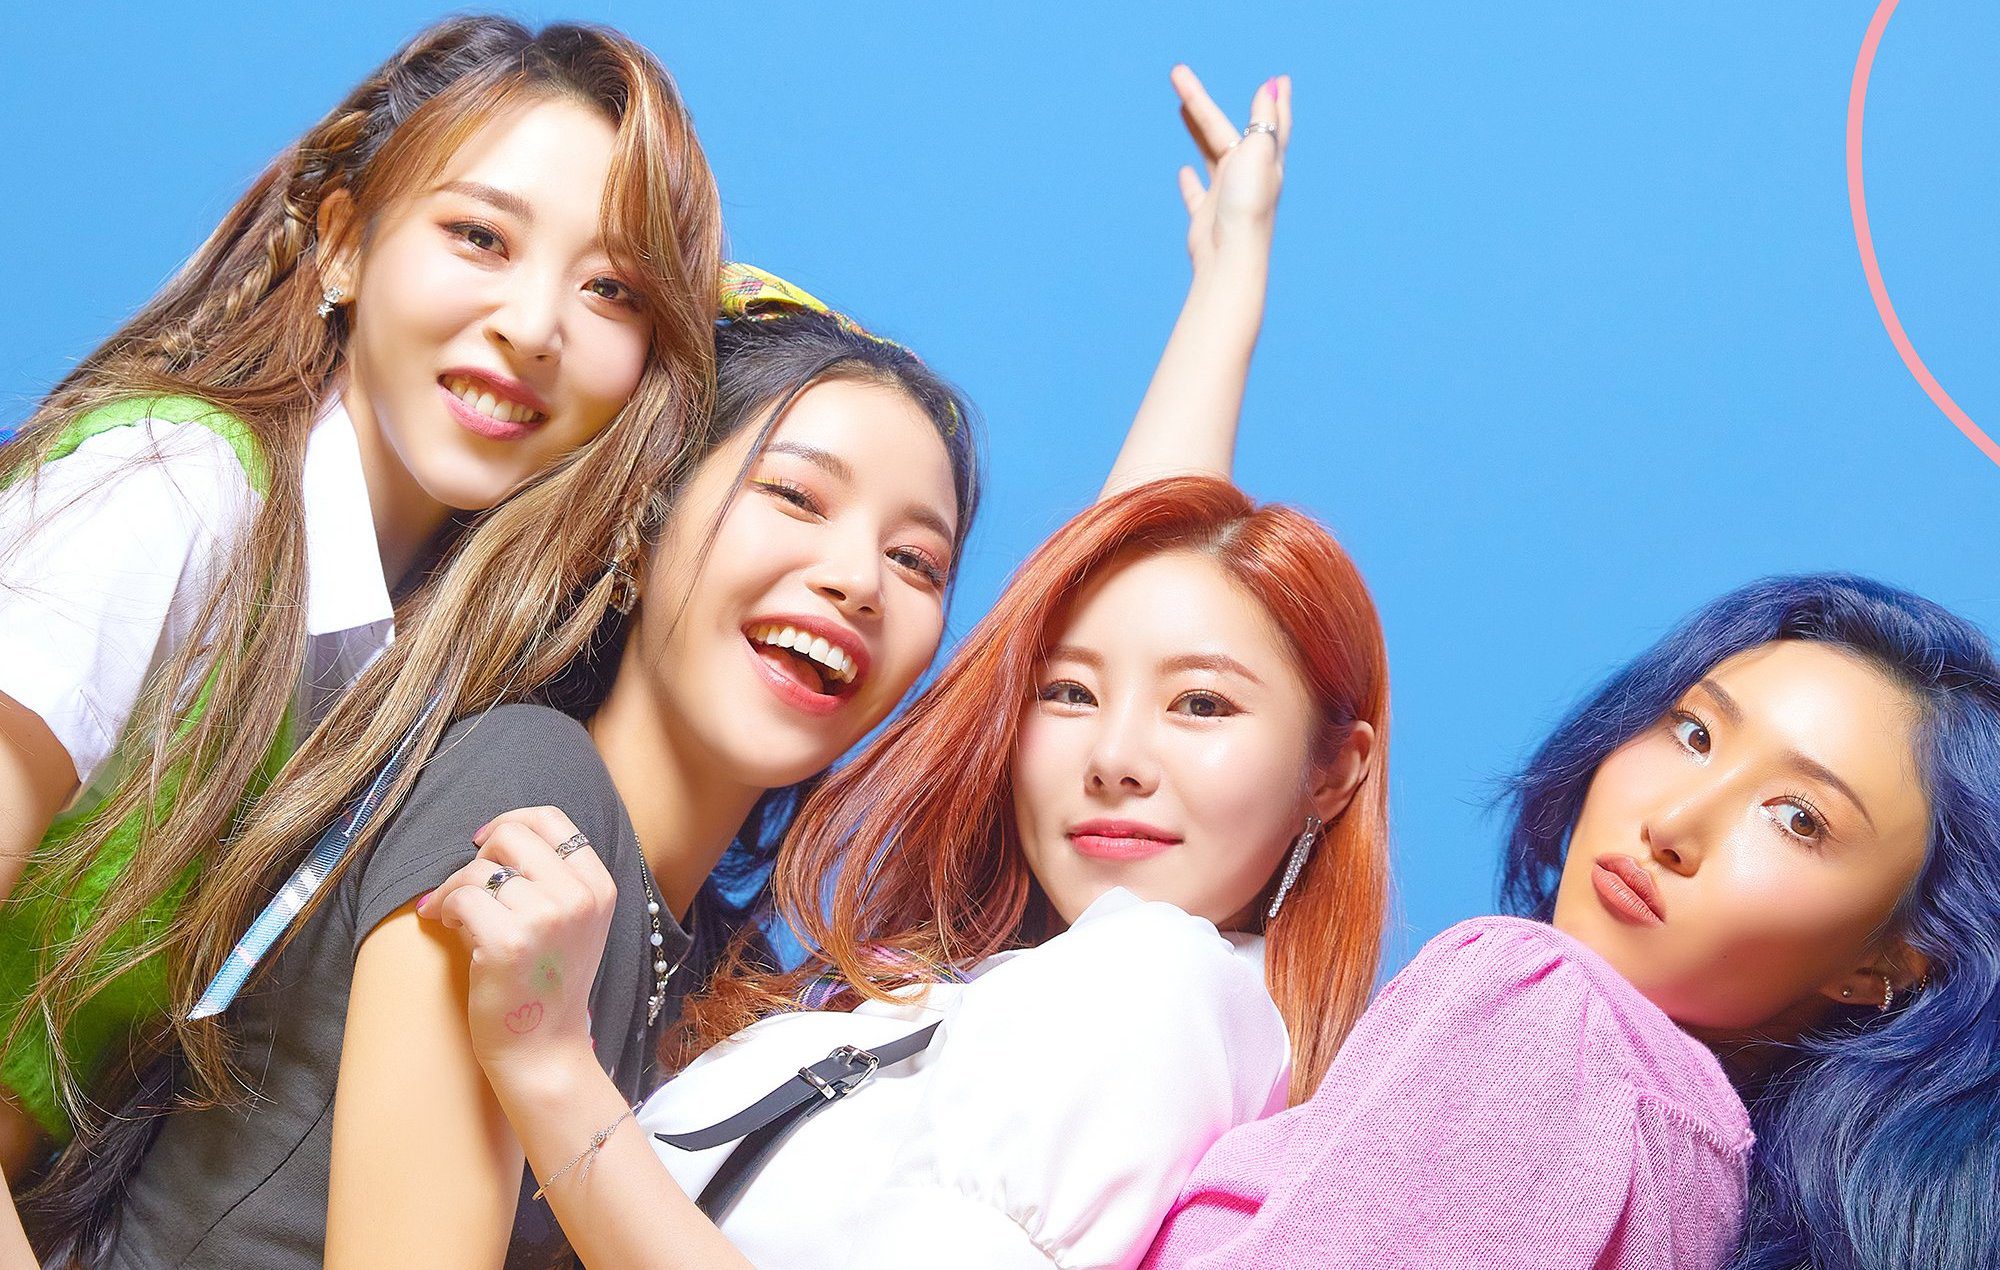 MAMAMOO’s Disbandment: When Will the 3rd Generation Girl Group Disband? 